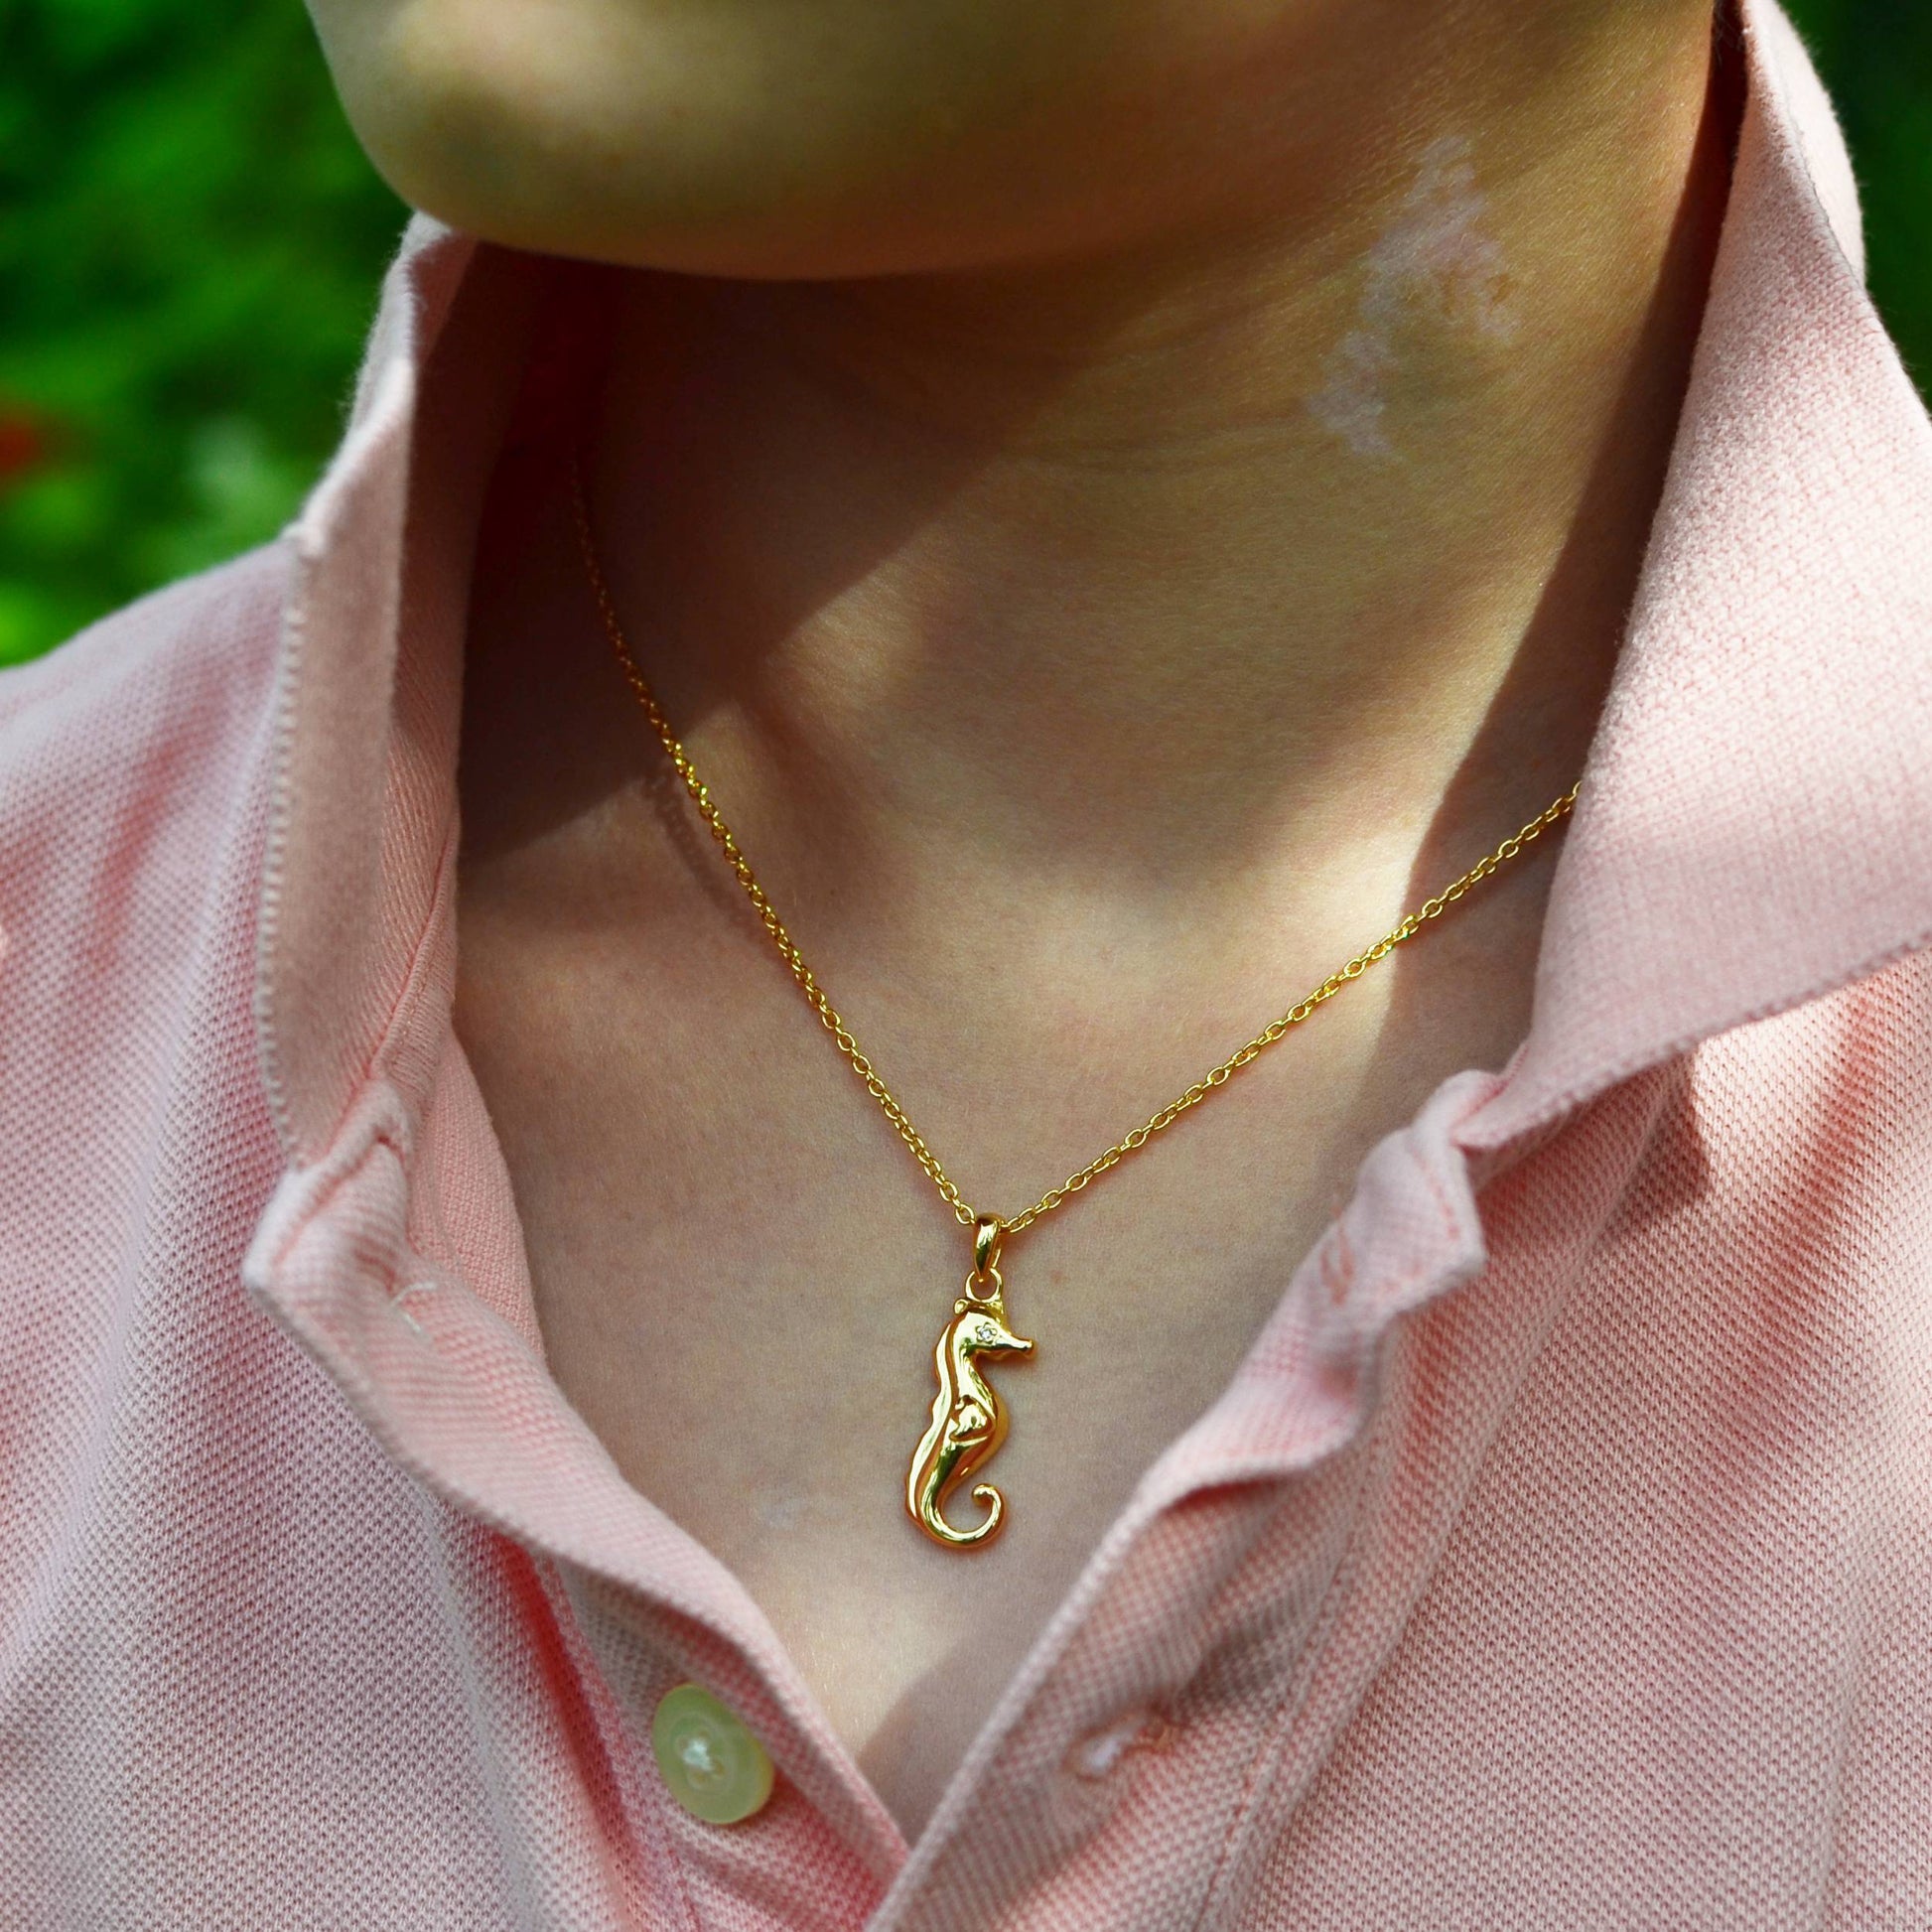 Boy wearing Gold Seahorse with Diamond Eye Pendant on an Extendable Chain Necklace